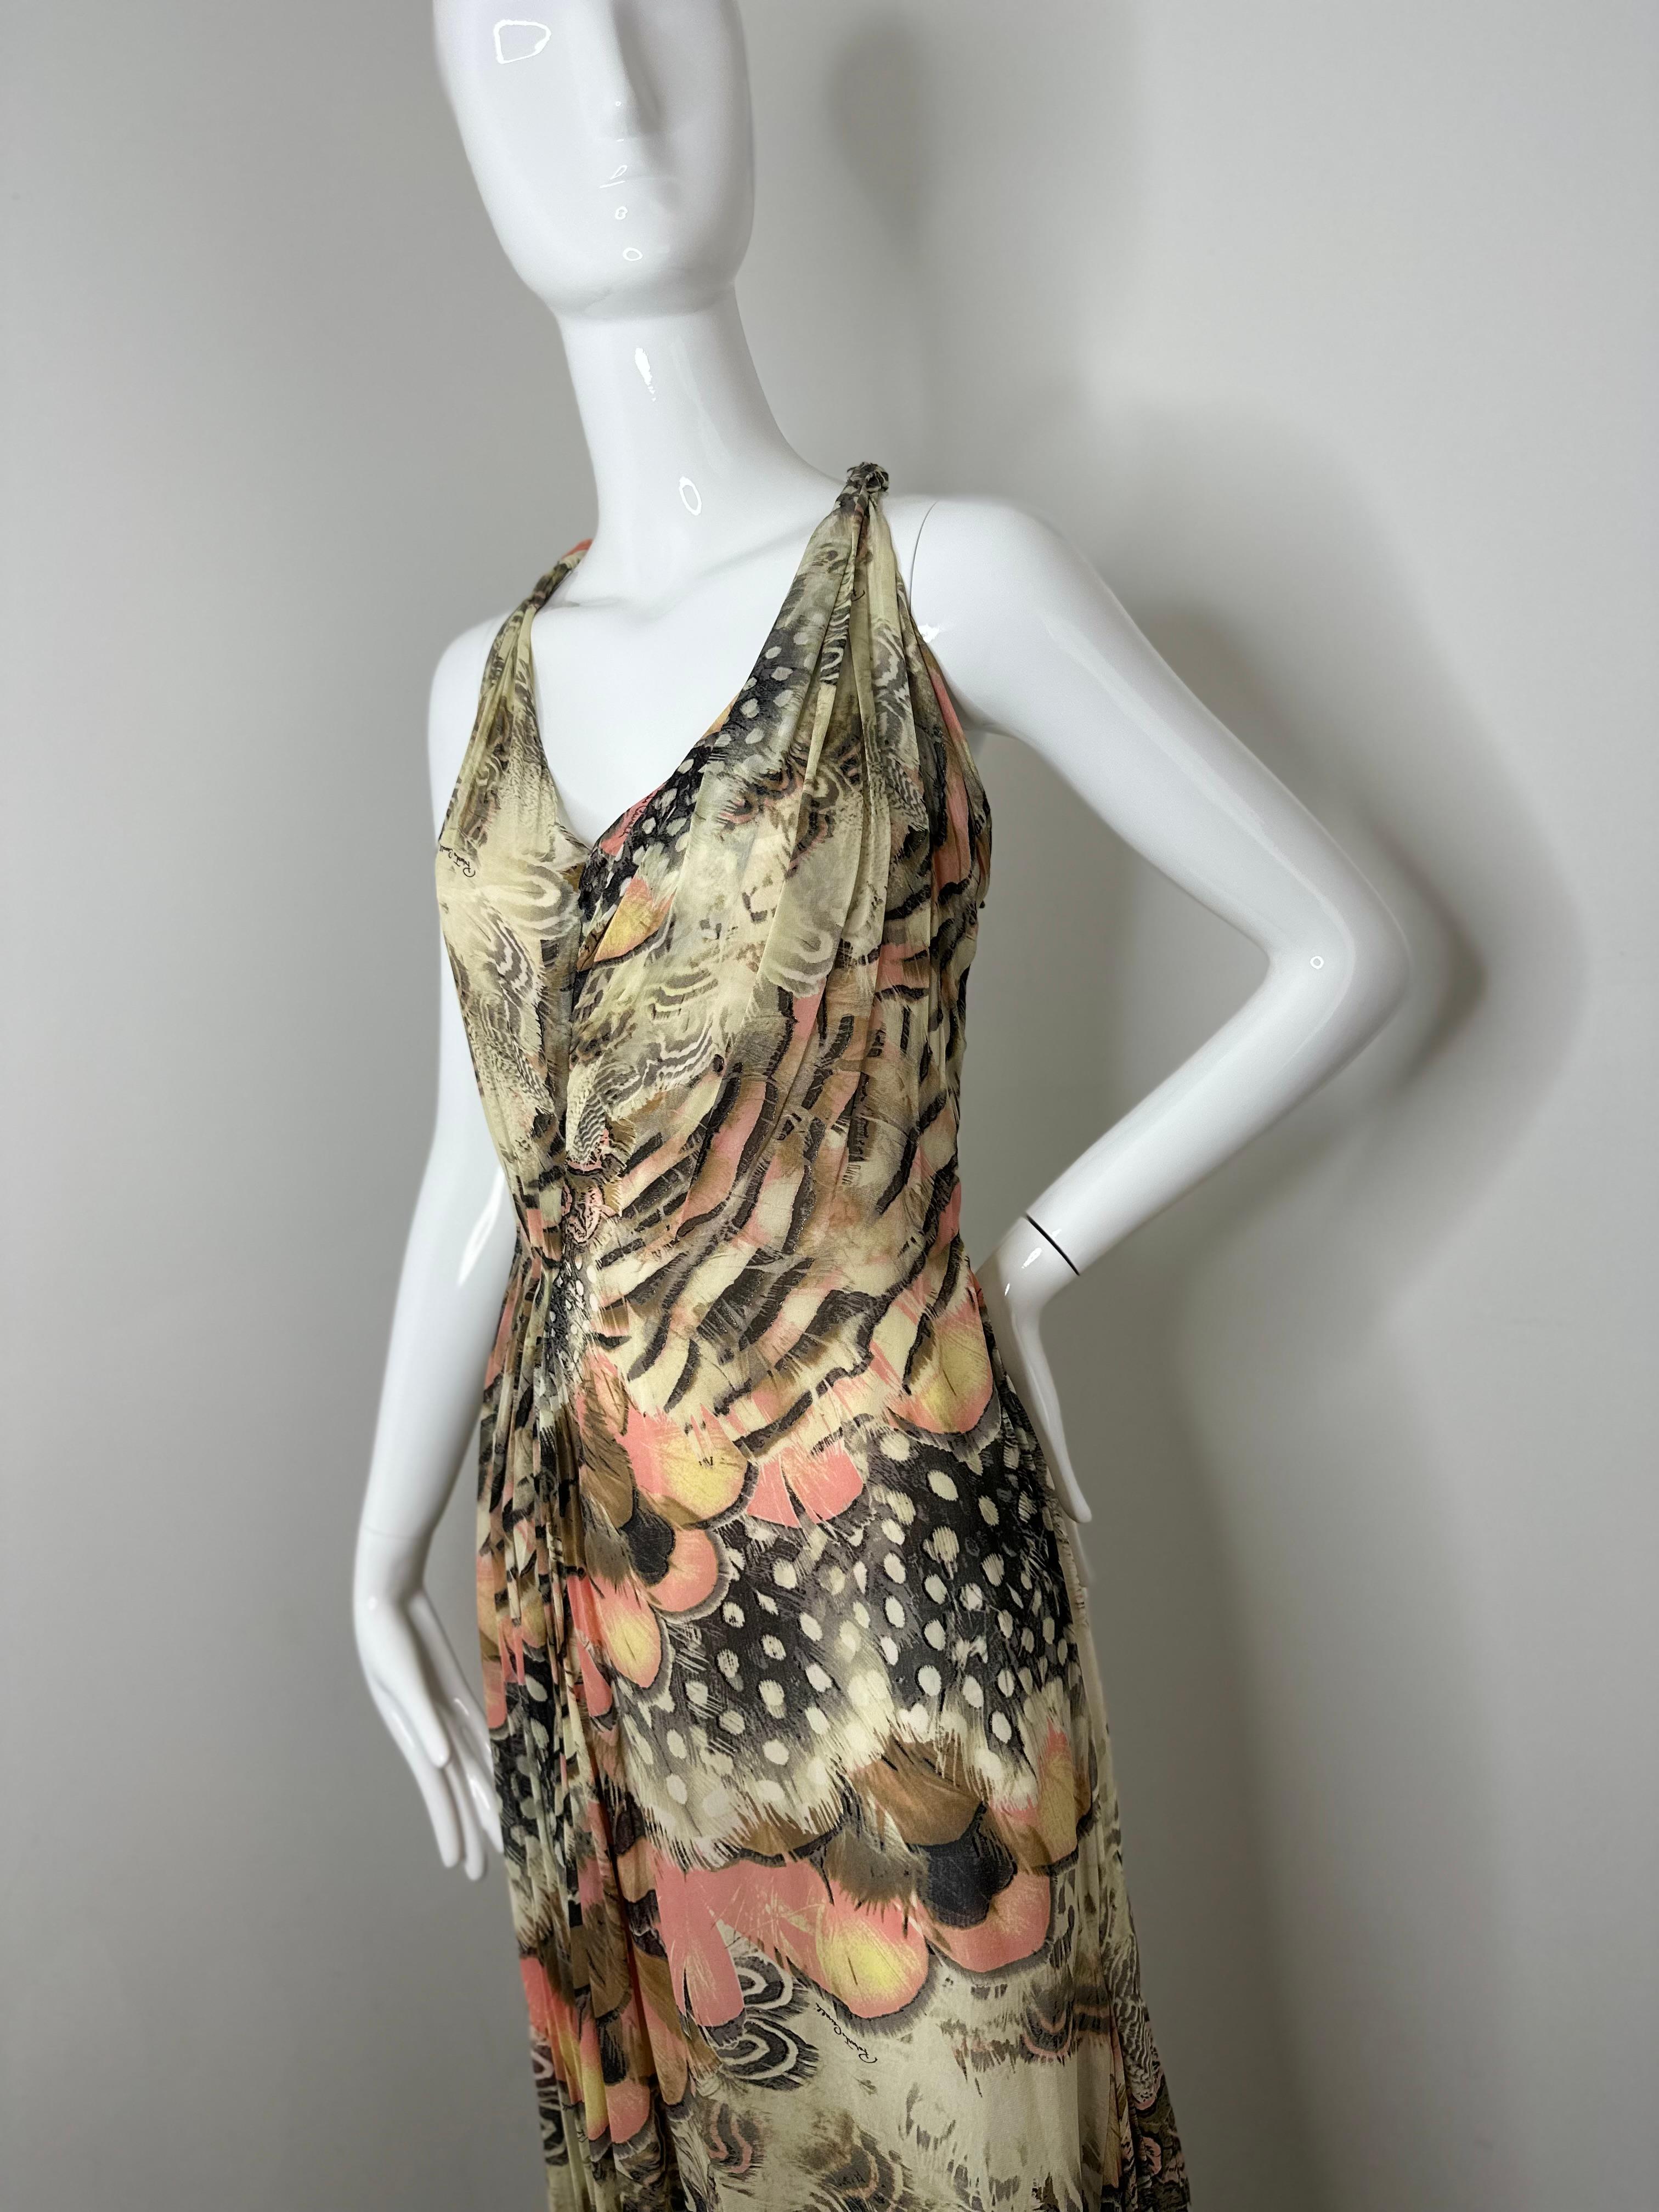 Roberto Cavalli 2004 feather gown 
Size M
Built in corset with a hidden side zipper 
Good vintage condition without any rips or stains.designer tag has been re-sewn as it has been previously fallen.
Material tag is missing, however this is a 100%